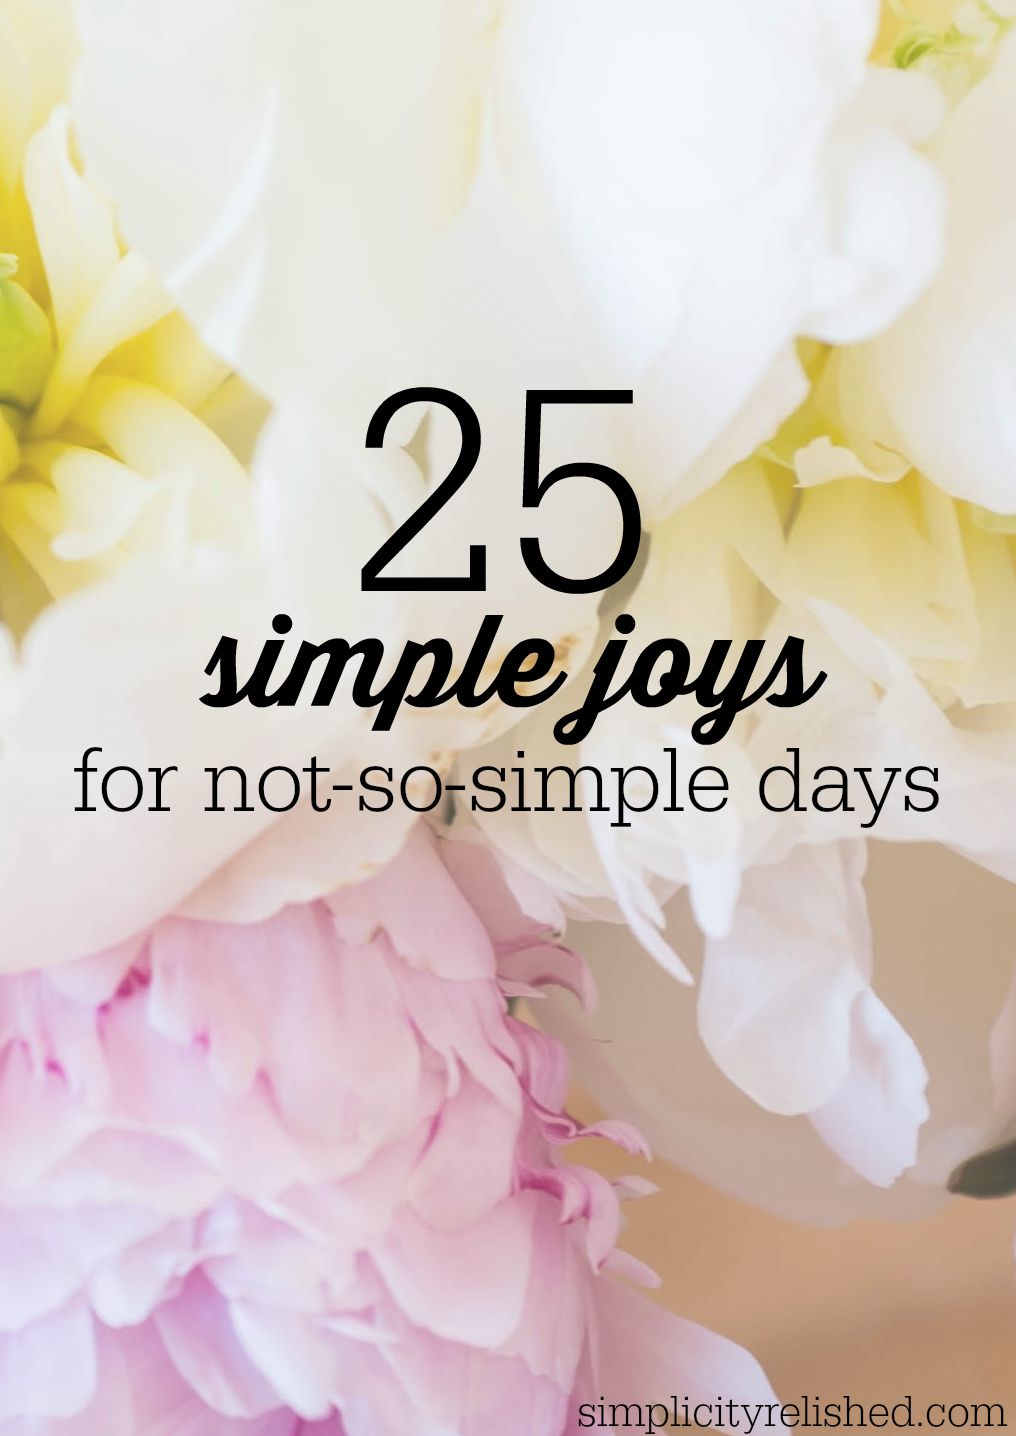 25 simple joys for not-so-simple days